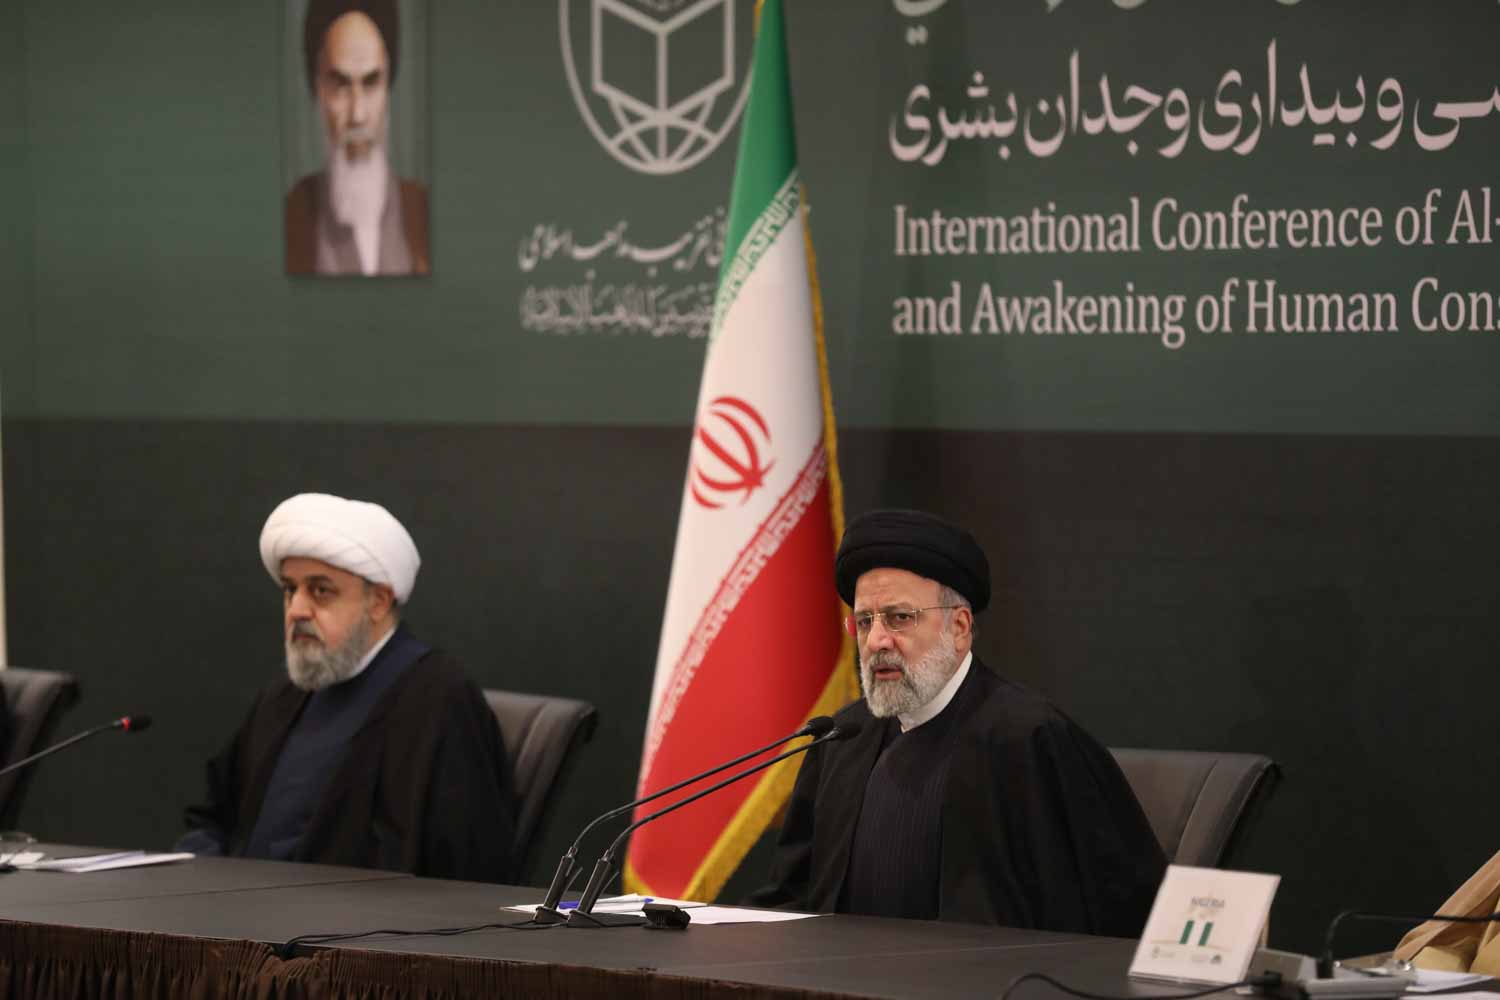 "Al-Aqsa Storm, Awakening of Human Conscience" conference in Tehran 2 (photo)  <img src="/images/picture_icon.png" width="13" height="13" border="0" align="top">